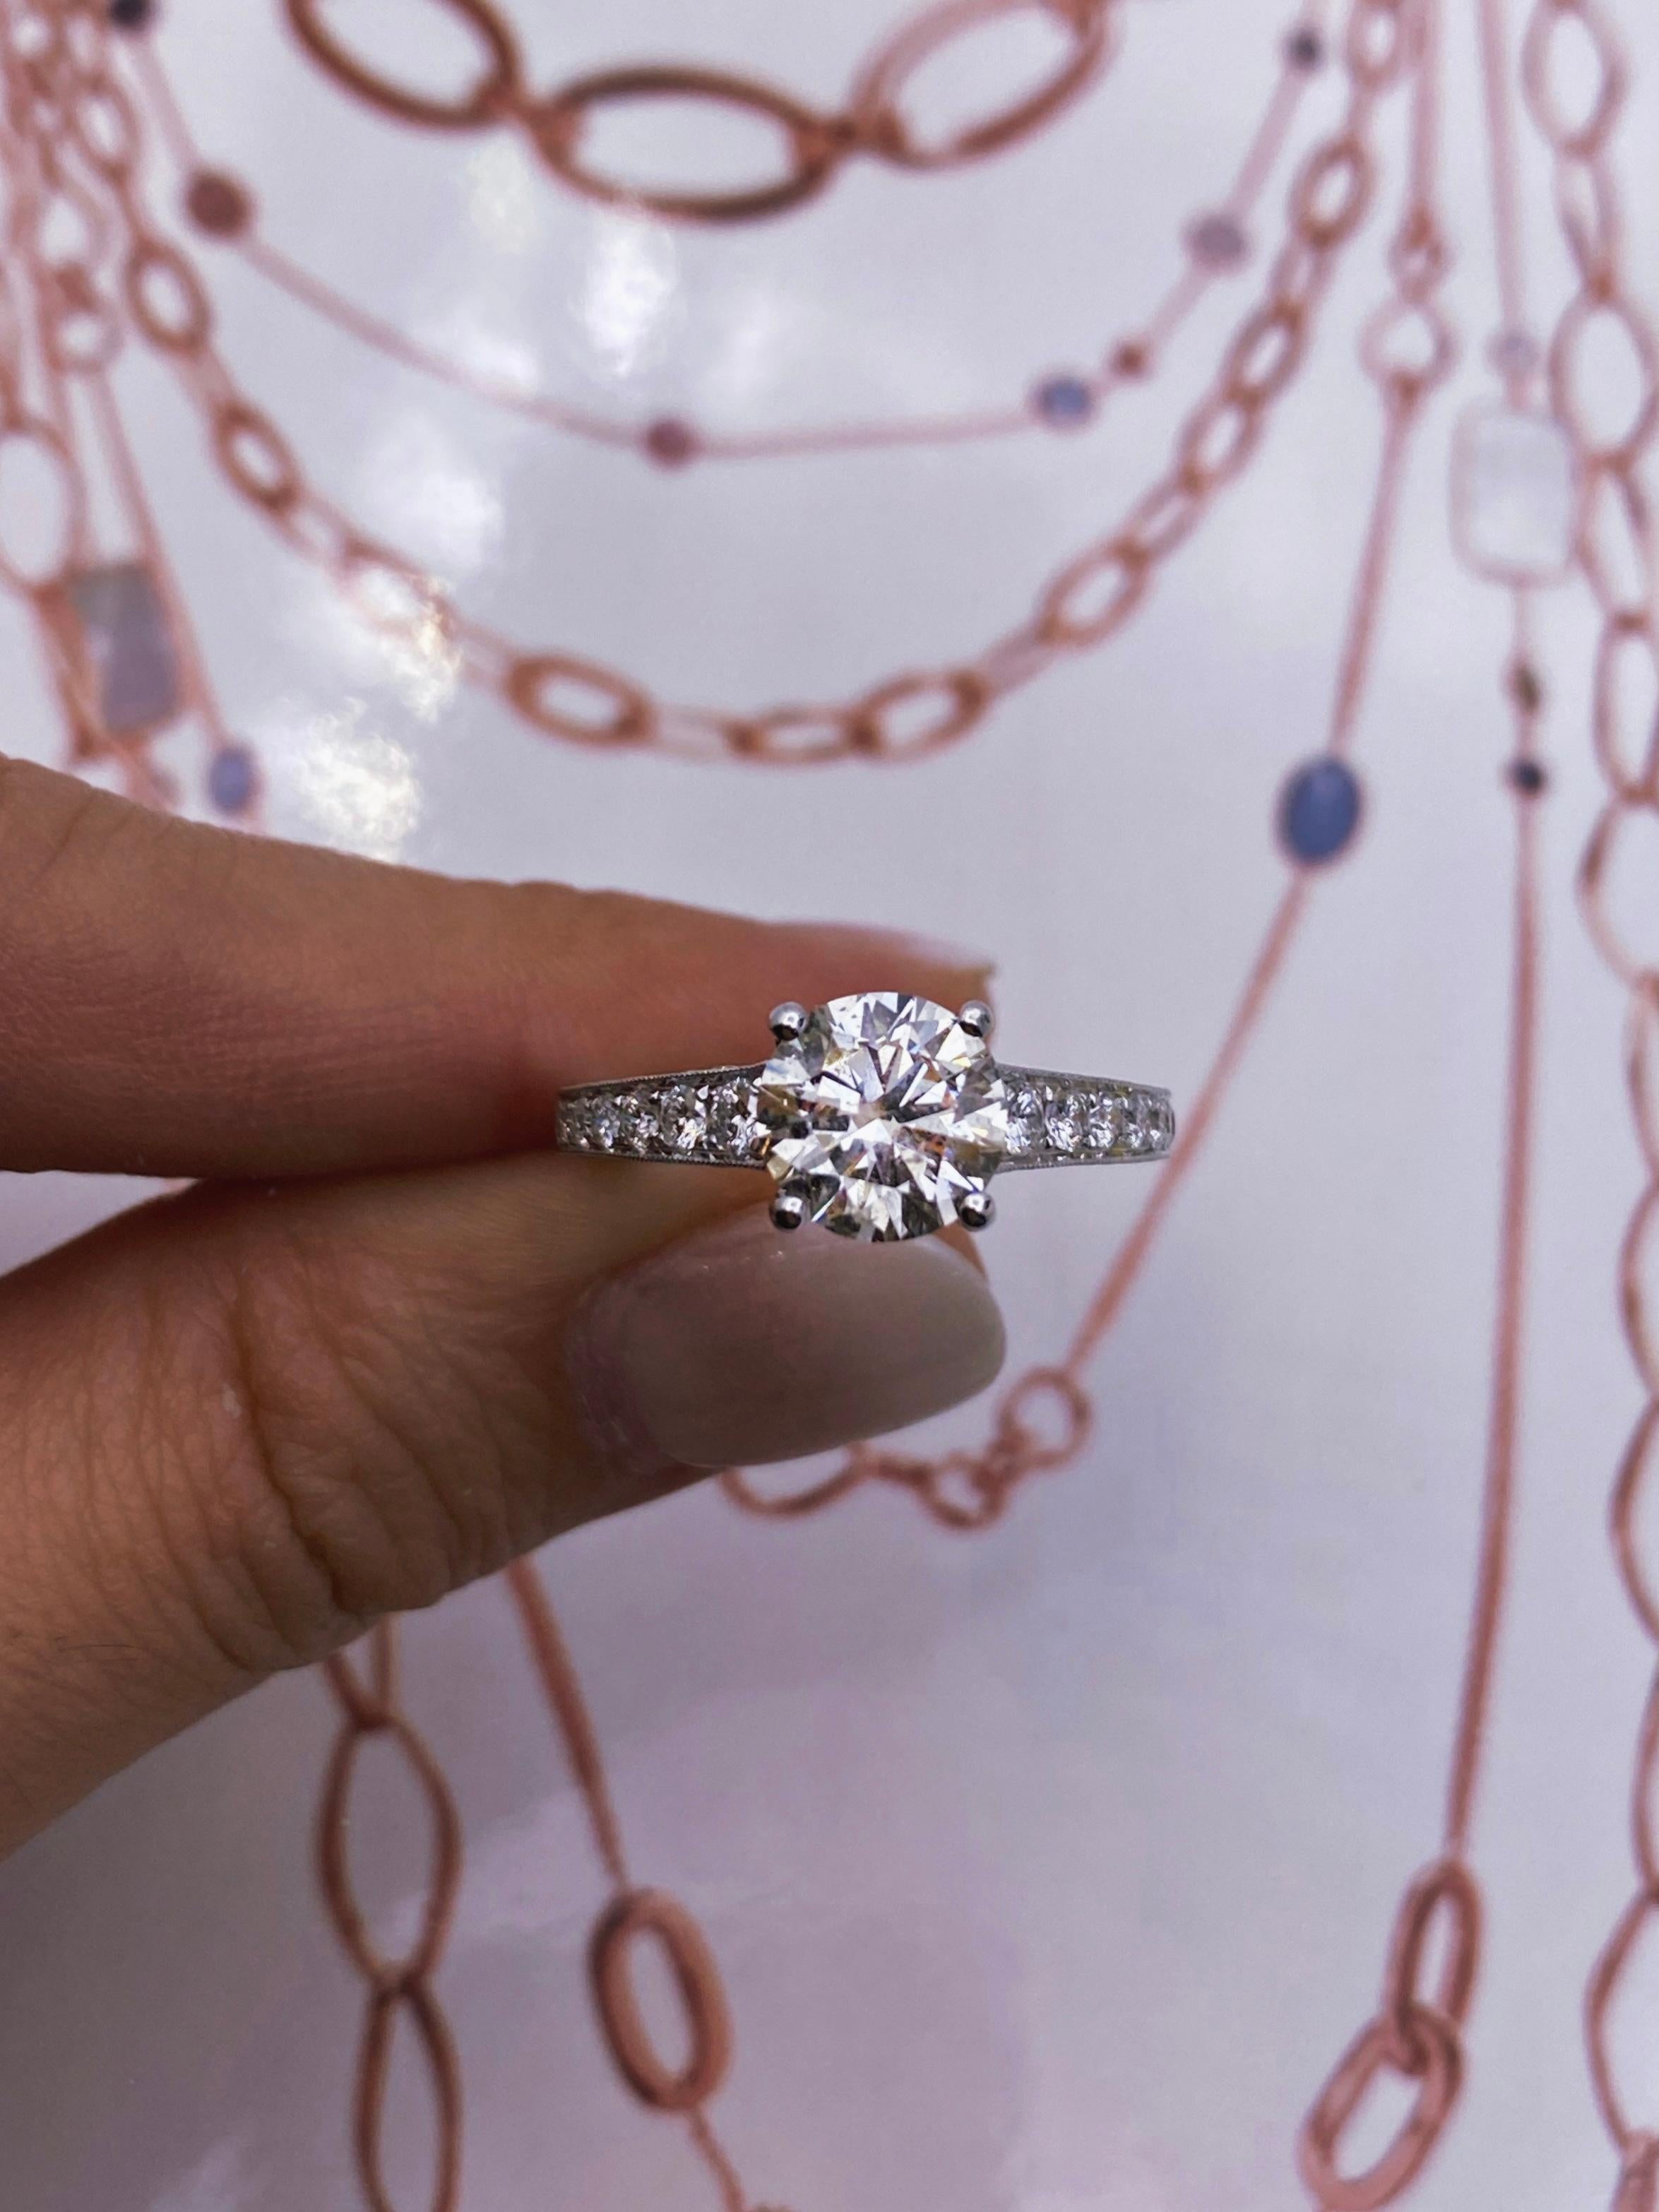 For Sale:  18k White Gold Engagement Ring with 2.25ct Diamonds 2